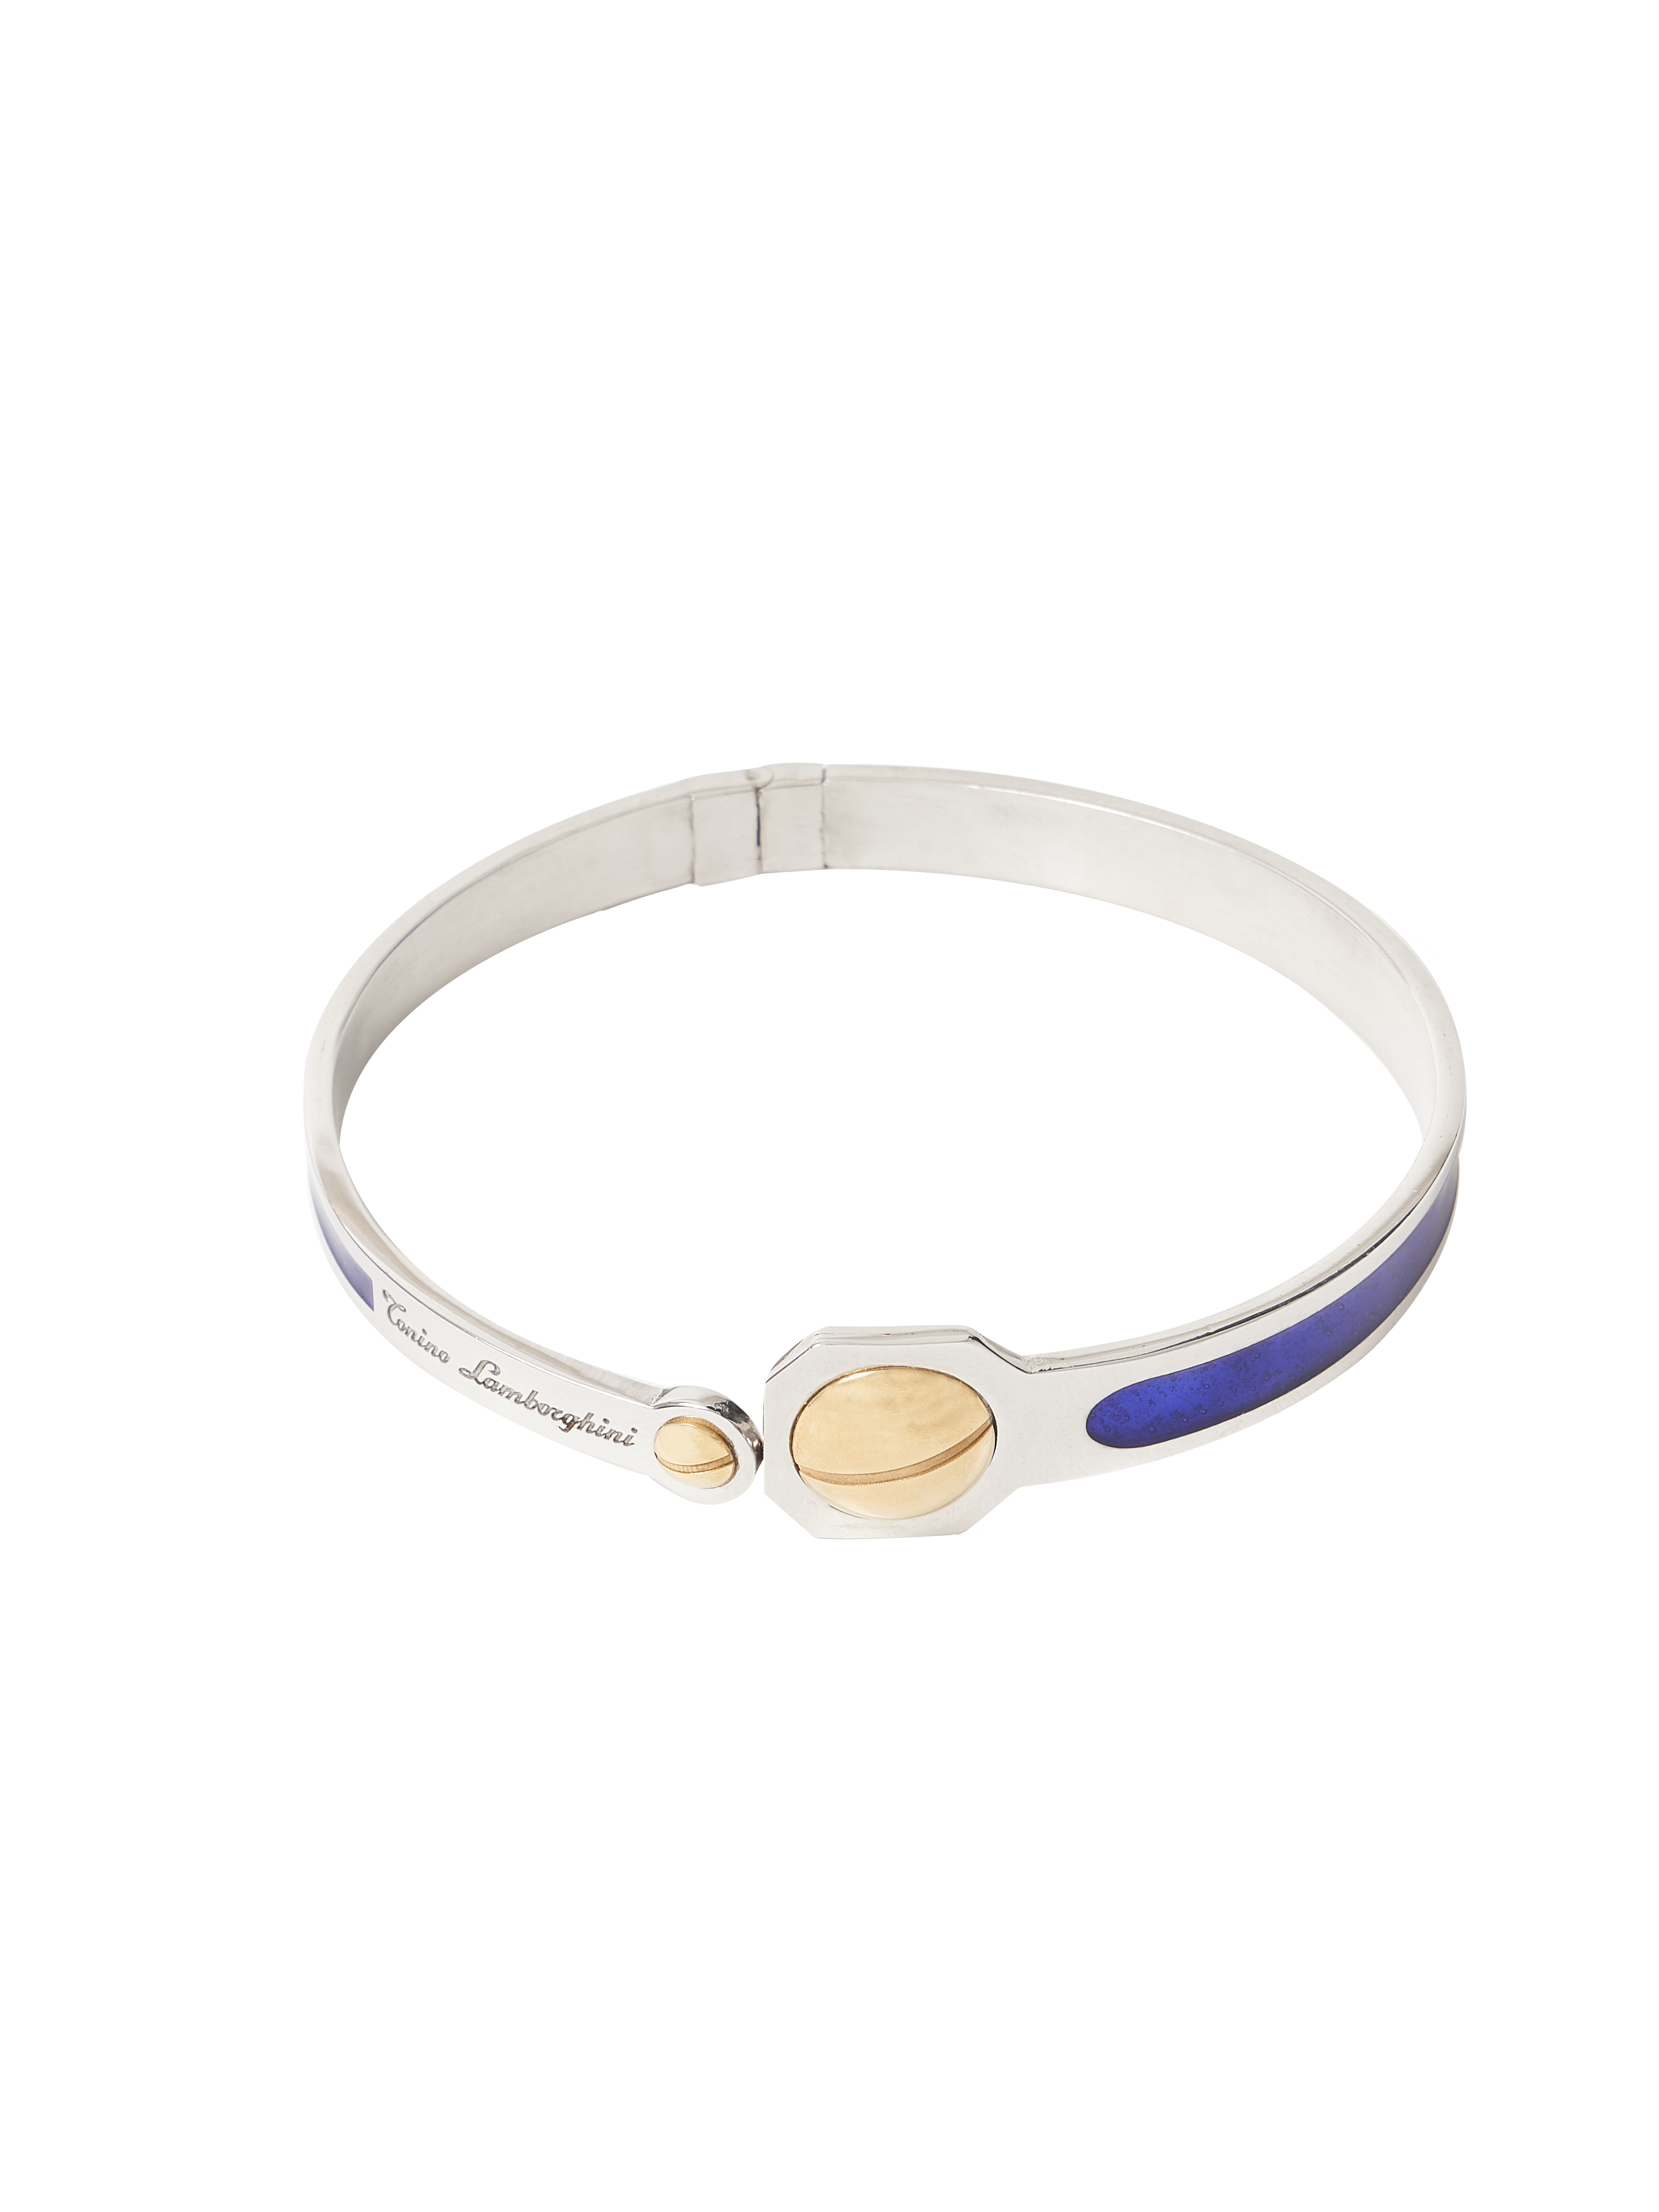 Bangle With Yellow Bolt - 7 cm